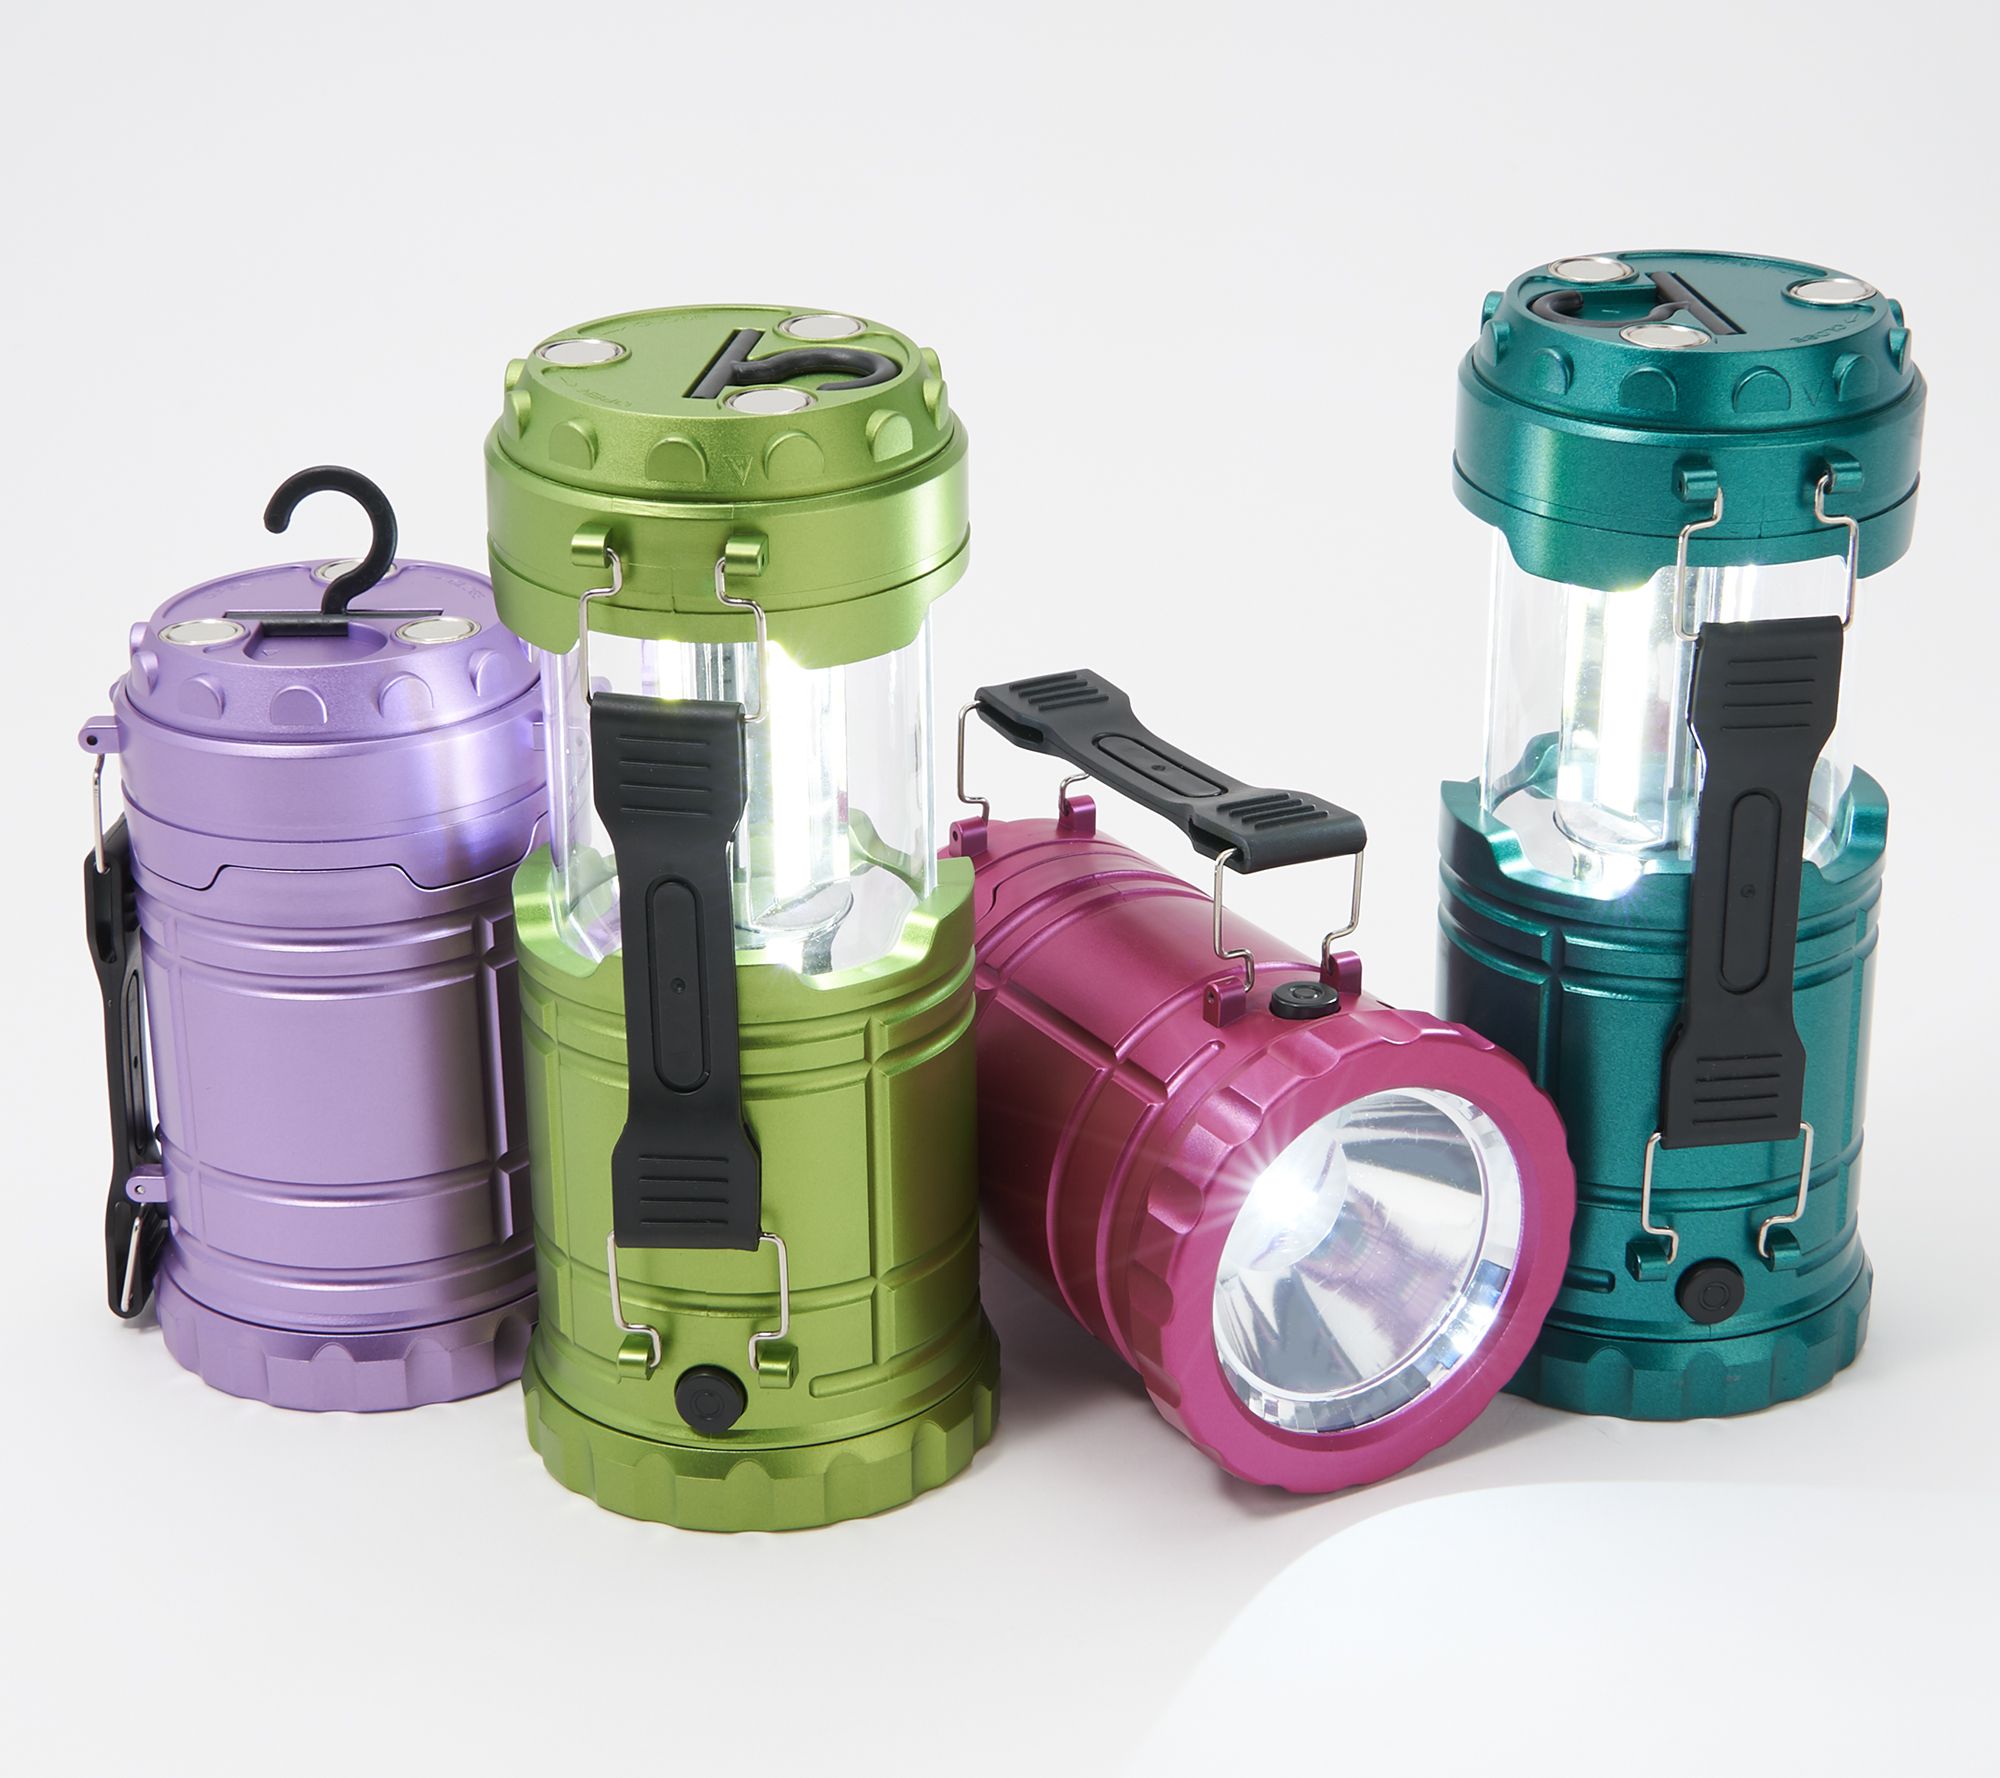 LED Pop Up Camping Lantern with a Flame Effect - Camping Lanterns - Torches  - Leisure